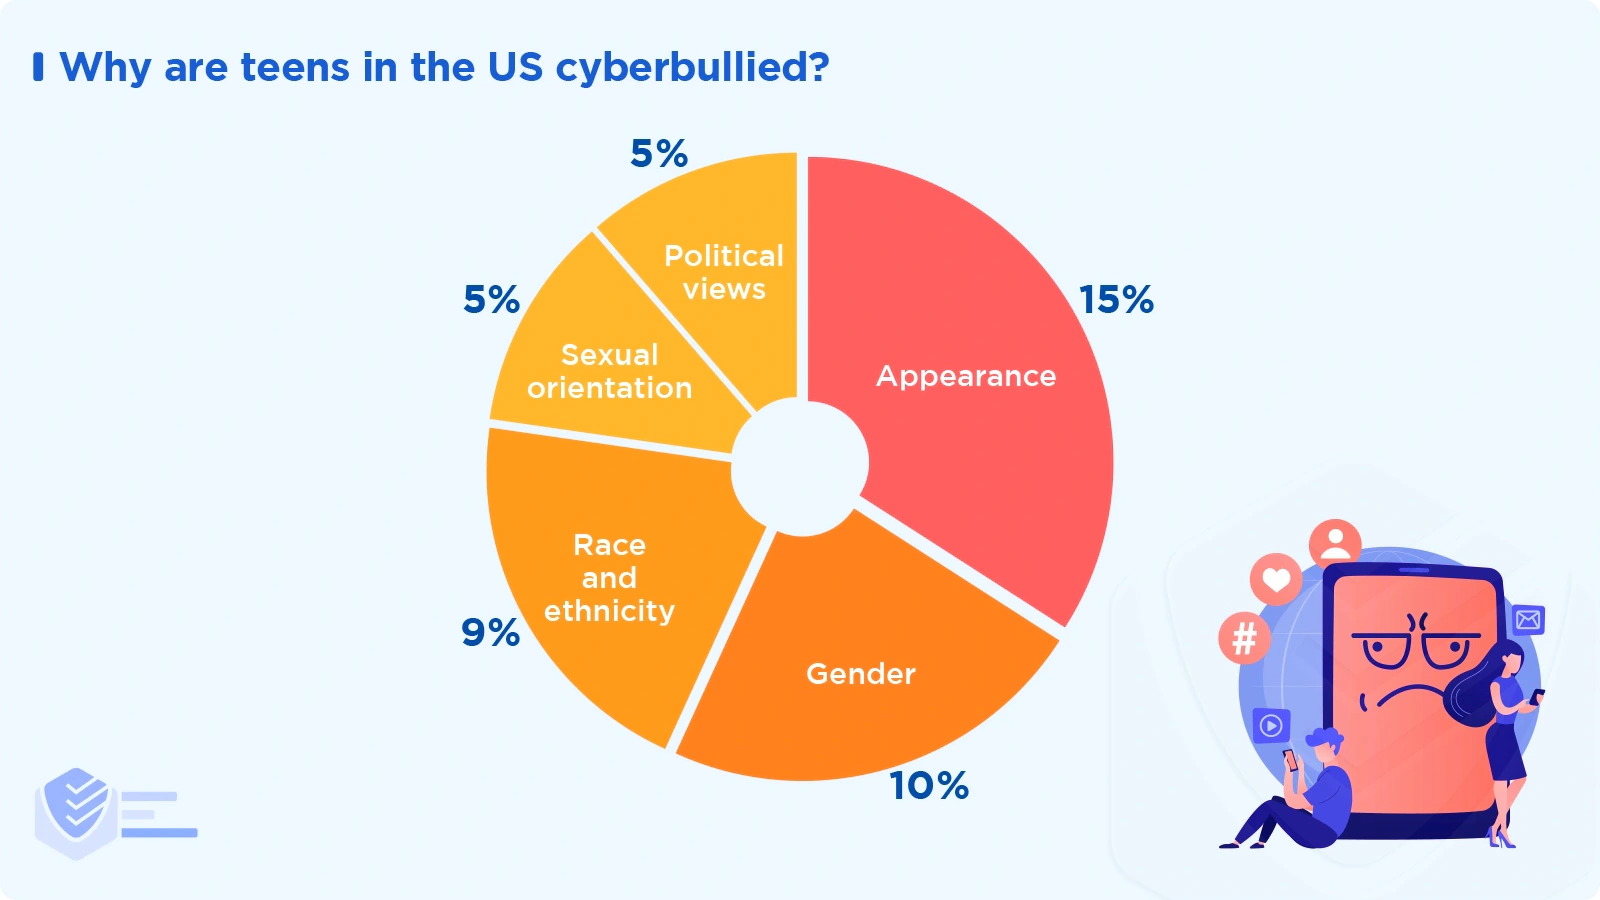 Why are teens in the US cyberbullied